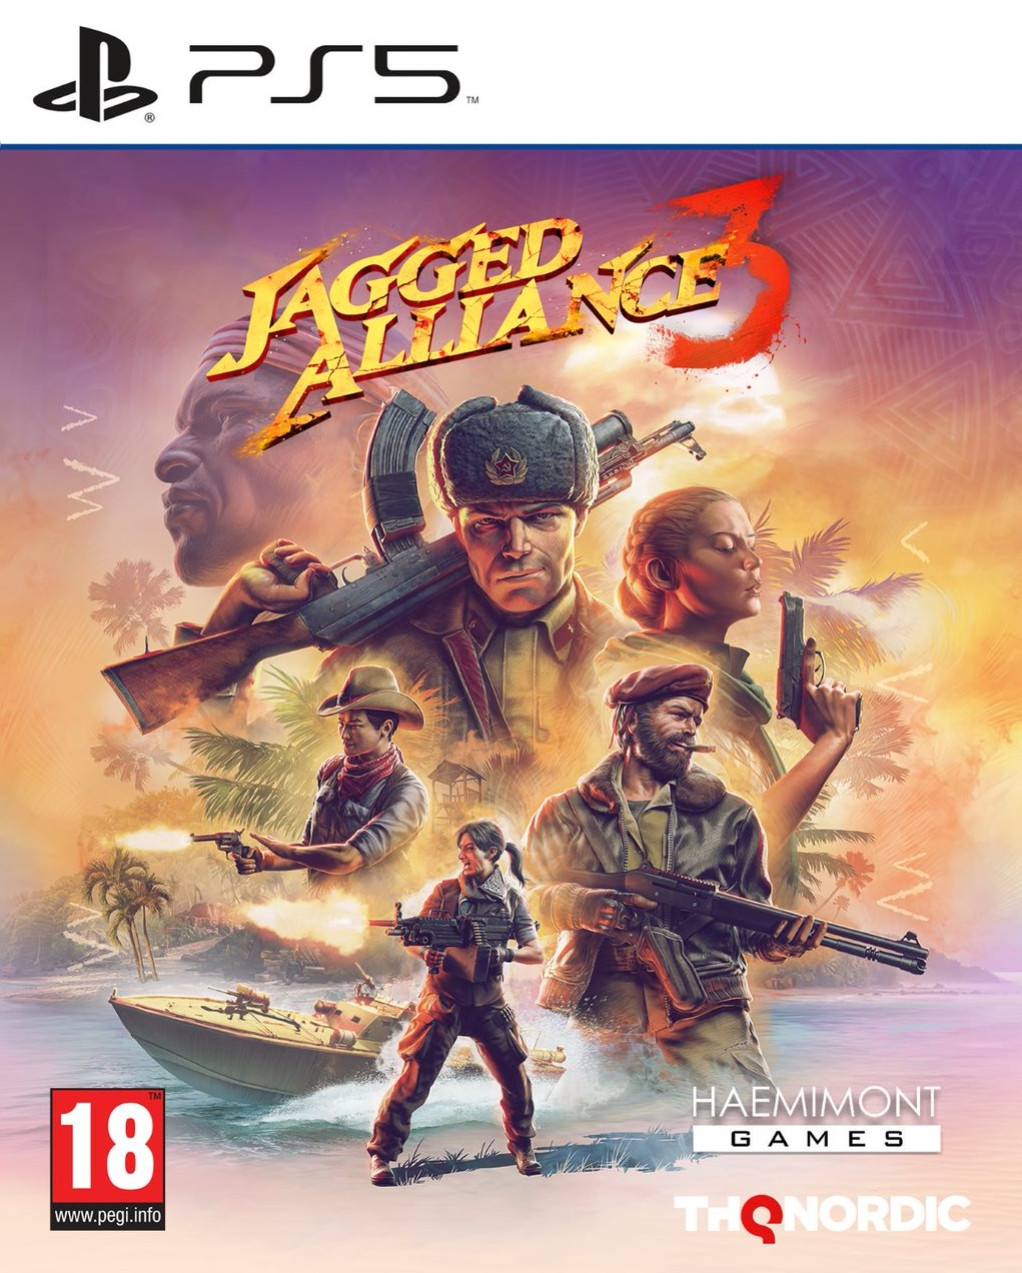 Jagged Alliance 3 (PS5), Haemmont Games